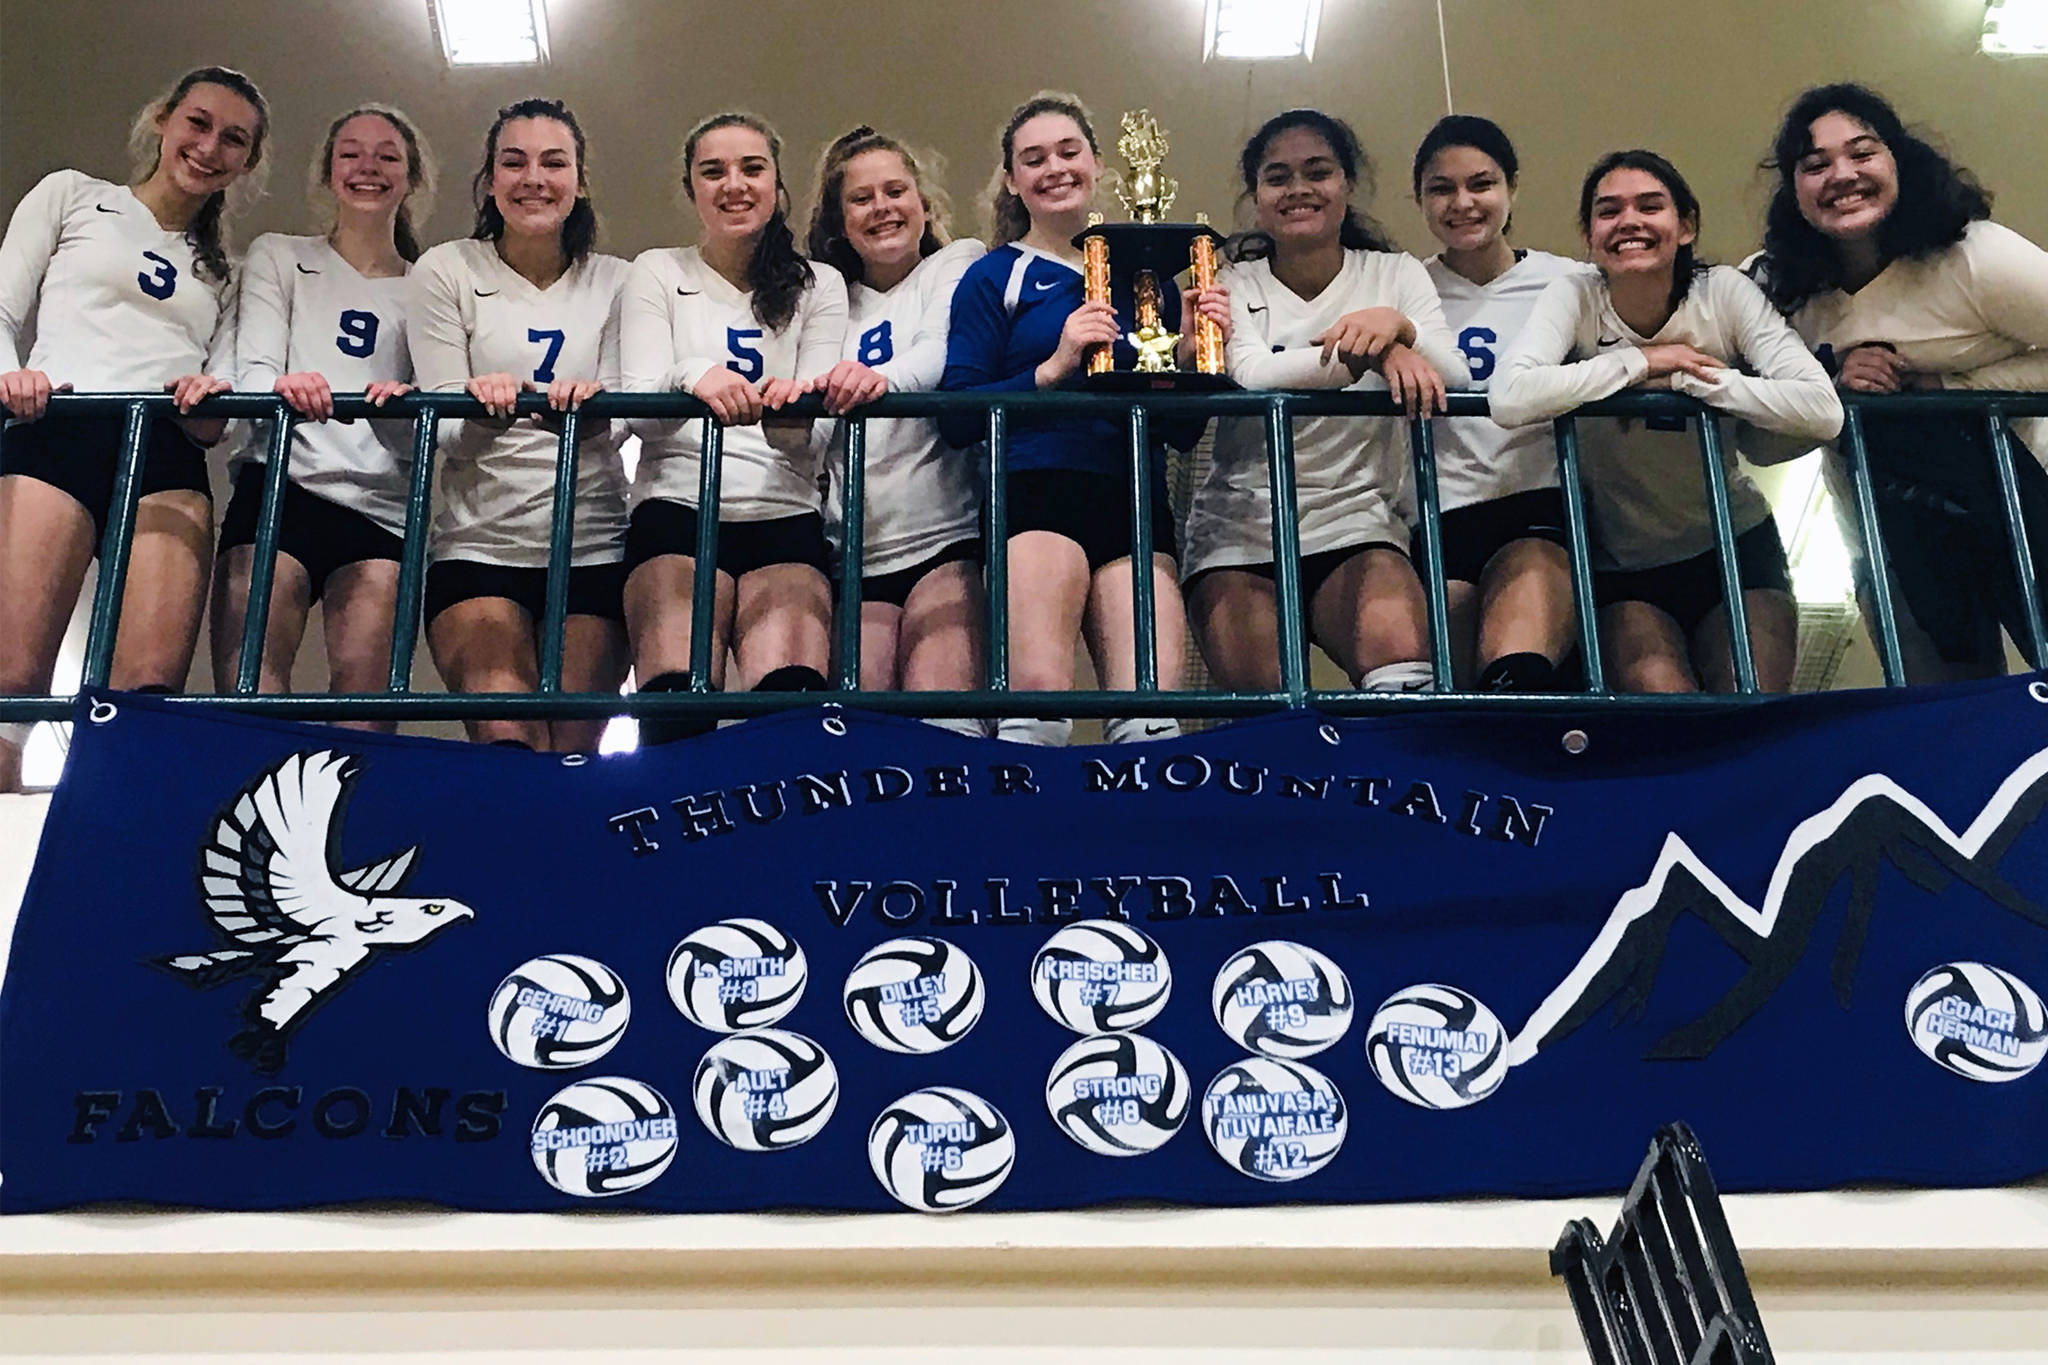 The Thunder Mountain High School volleyball team poses with the Dimond Service Volleyball Tournament Silver Bracket championship trophy at Service High School on Saturday, Oct. 26, 2019. The Falcons defeated West Valley High School 2-1 (21-25, 26-24, 15-12) to win the title at the tournament hosted by Service and Dimond high schools of Anchorage. (Courtesy Photo | Julie Herman)